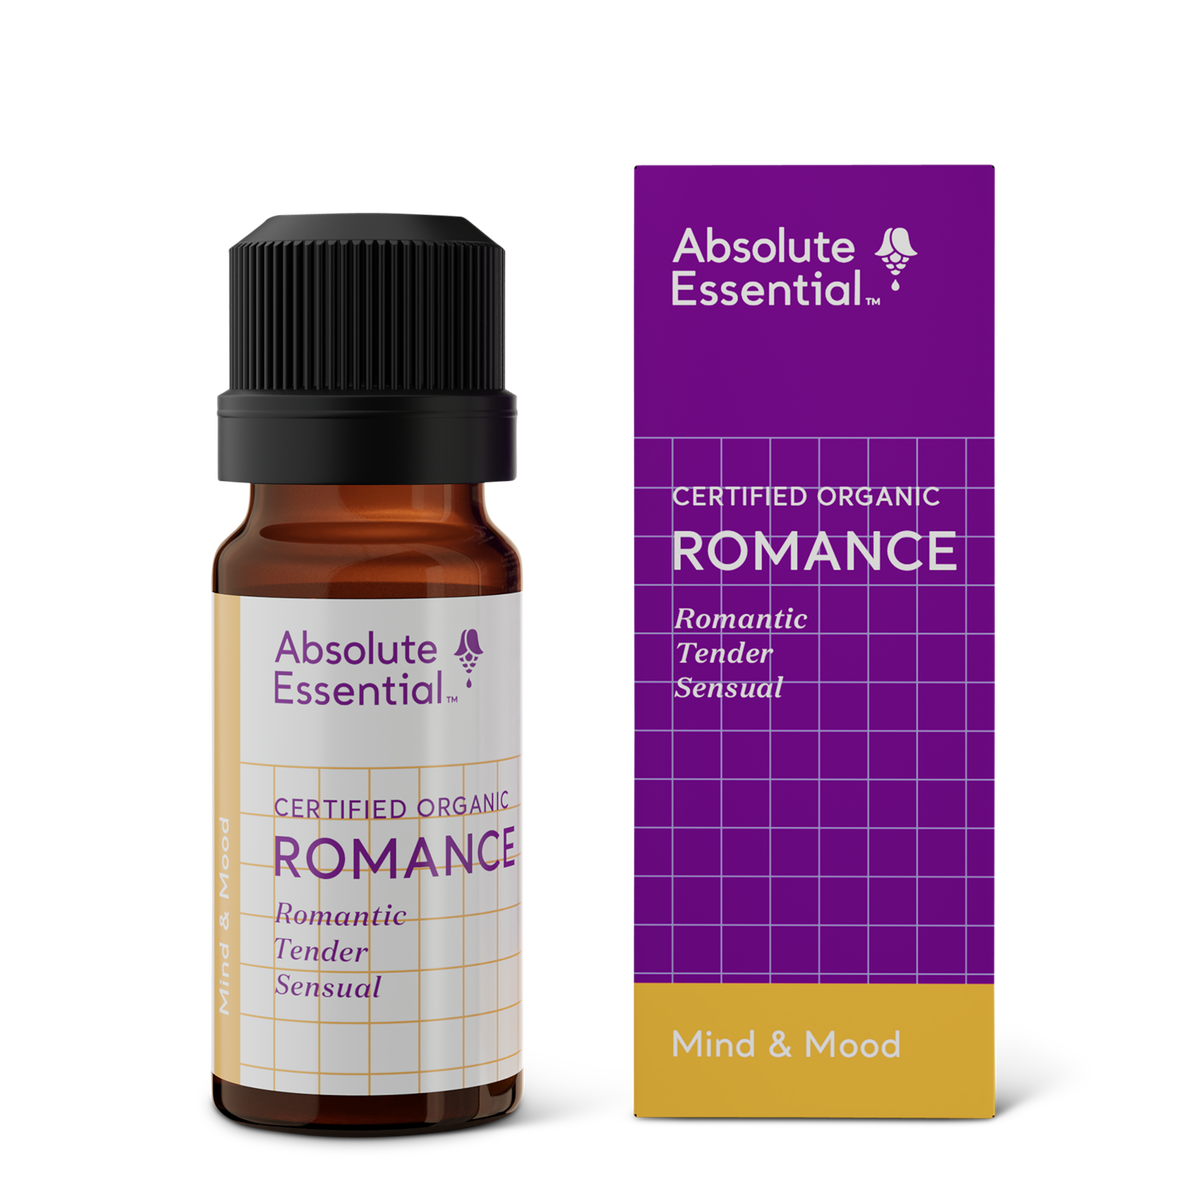 Absolute Essential Absolute Romance Oil